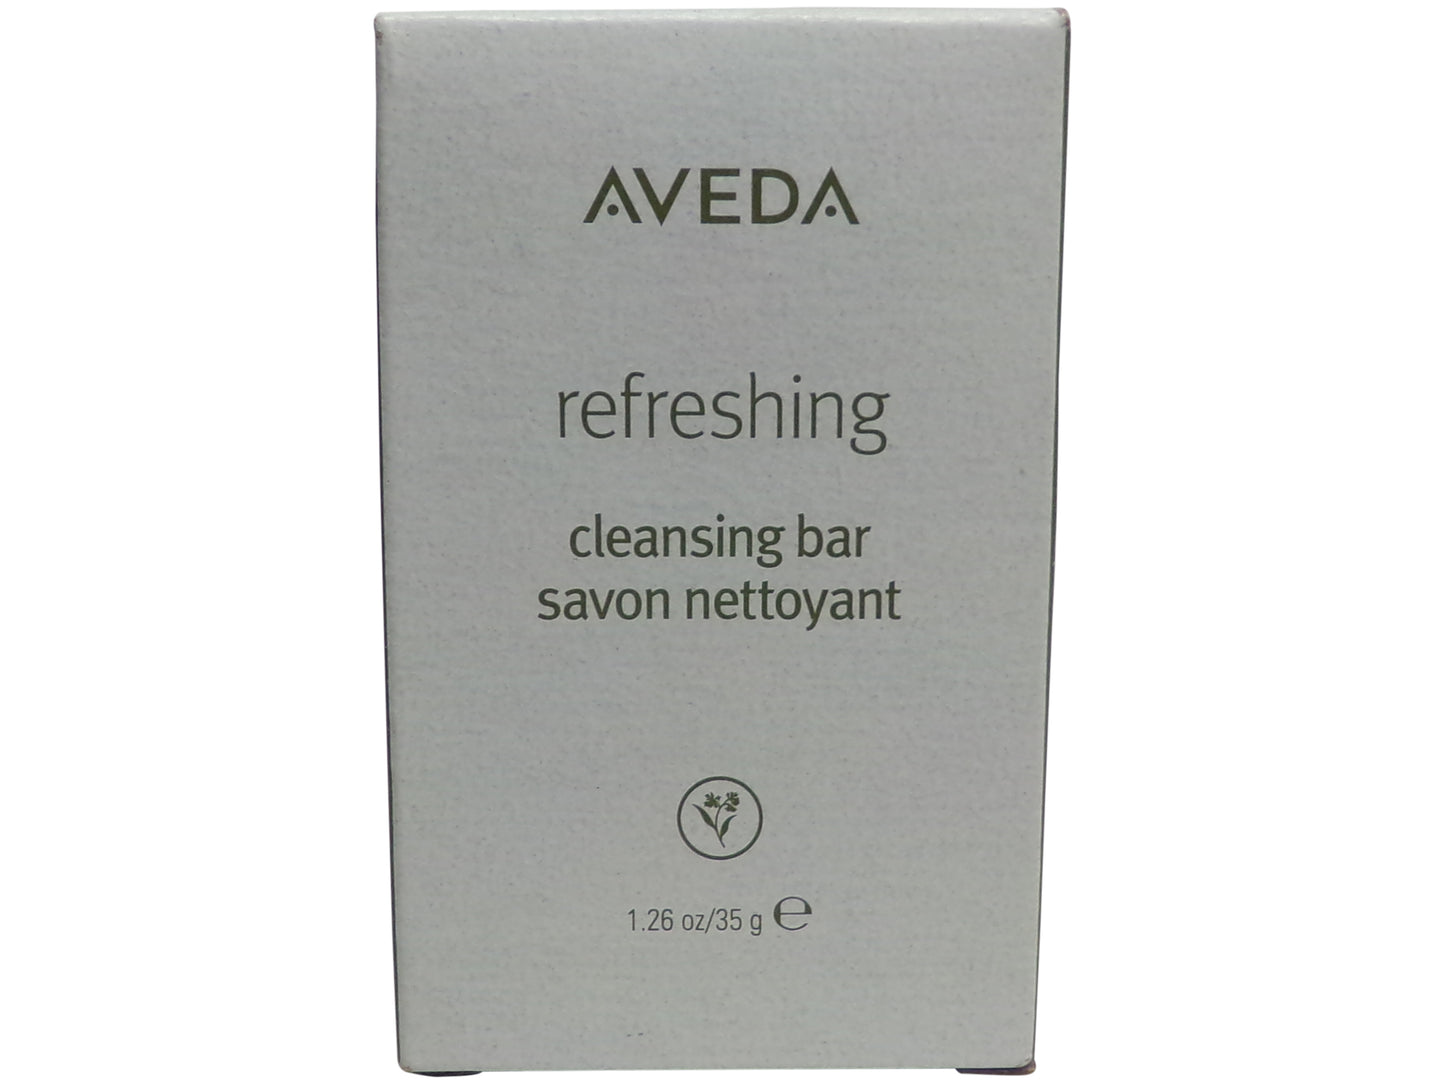 Aveda Refreshing Cleansing Soap lot of 6 Each 1.25oz bars.